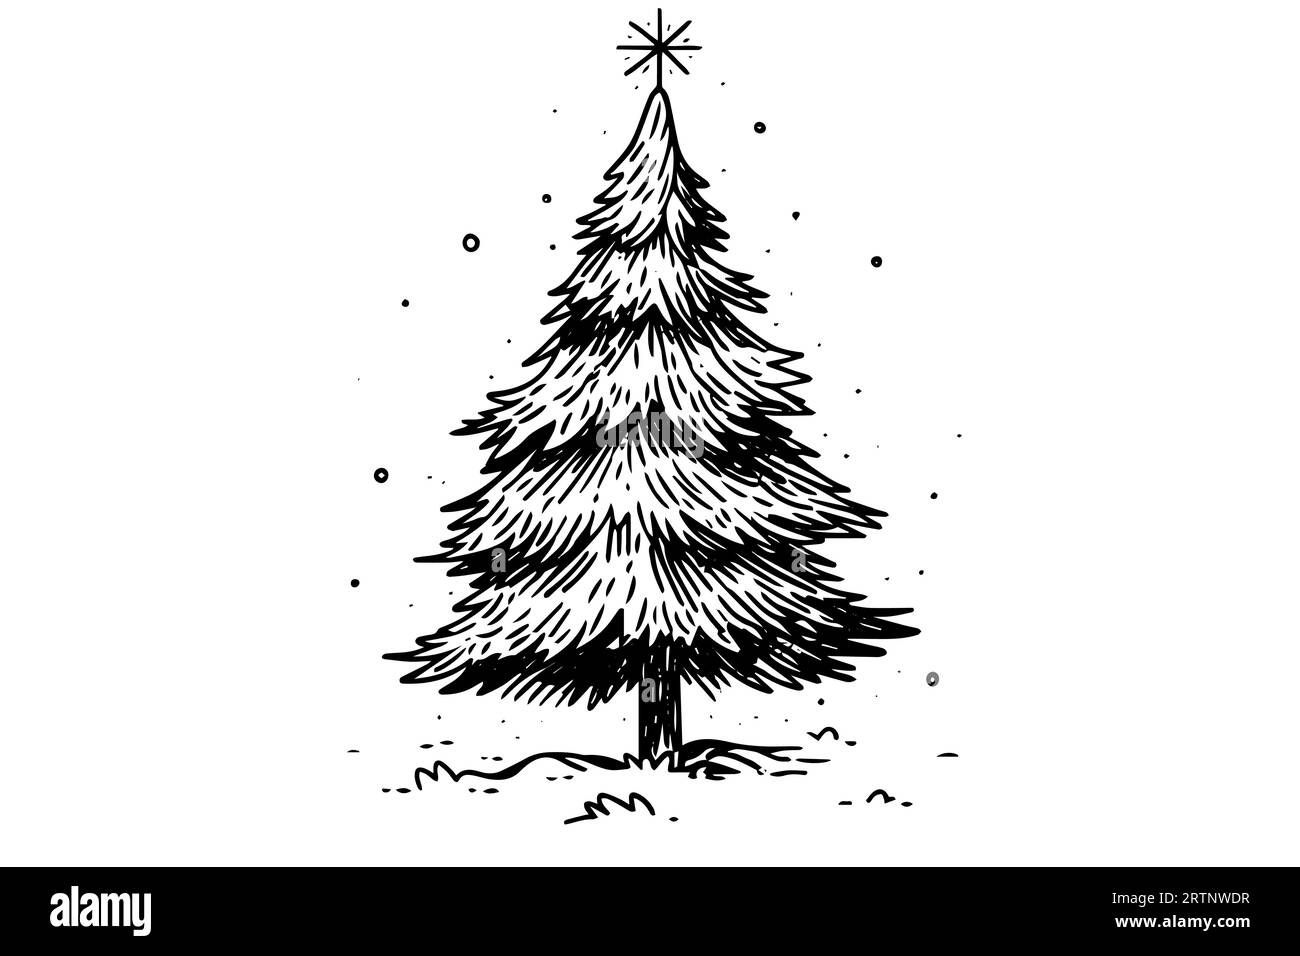 Christmas tree vector illustration. Hand drawn ink sketch. Engraving style image. Stock Vector